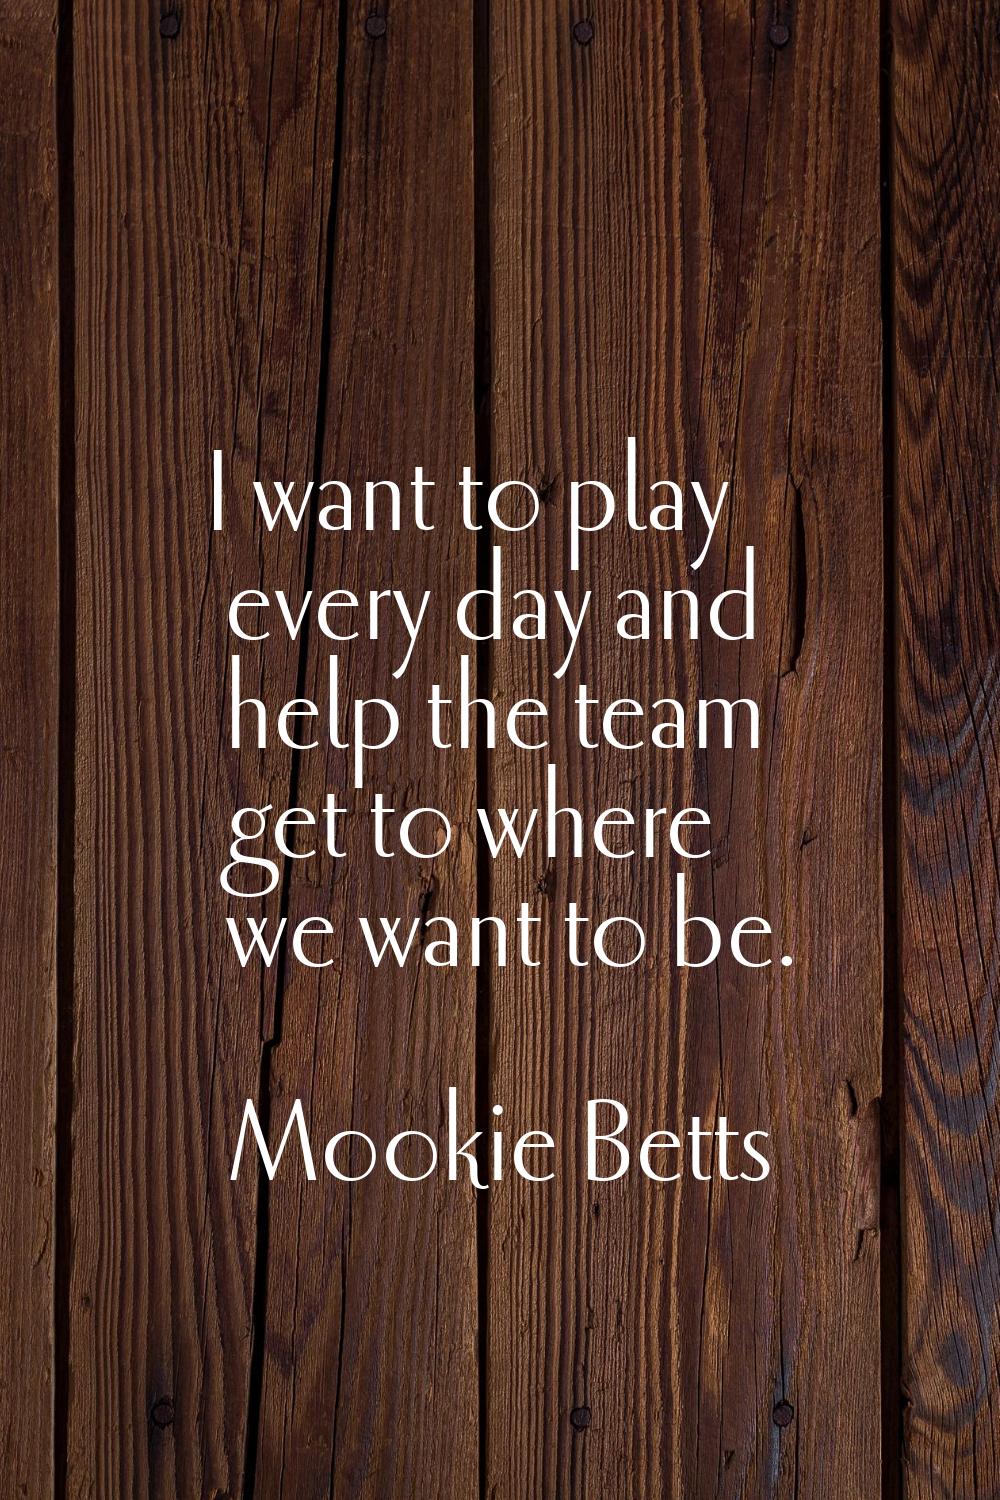 I want to play every day and help the team get to where we want to be.